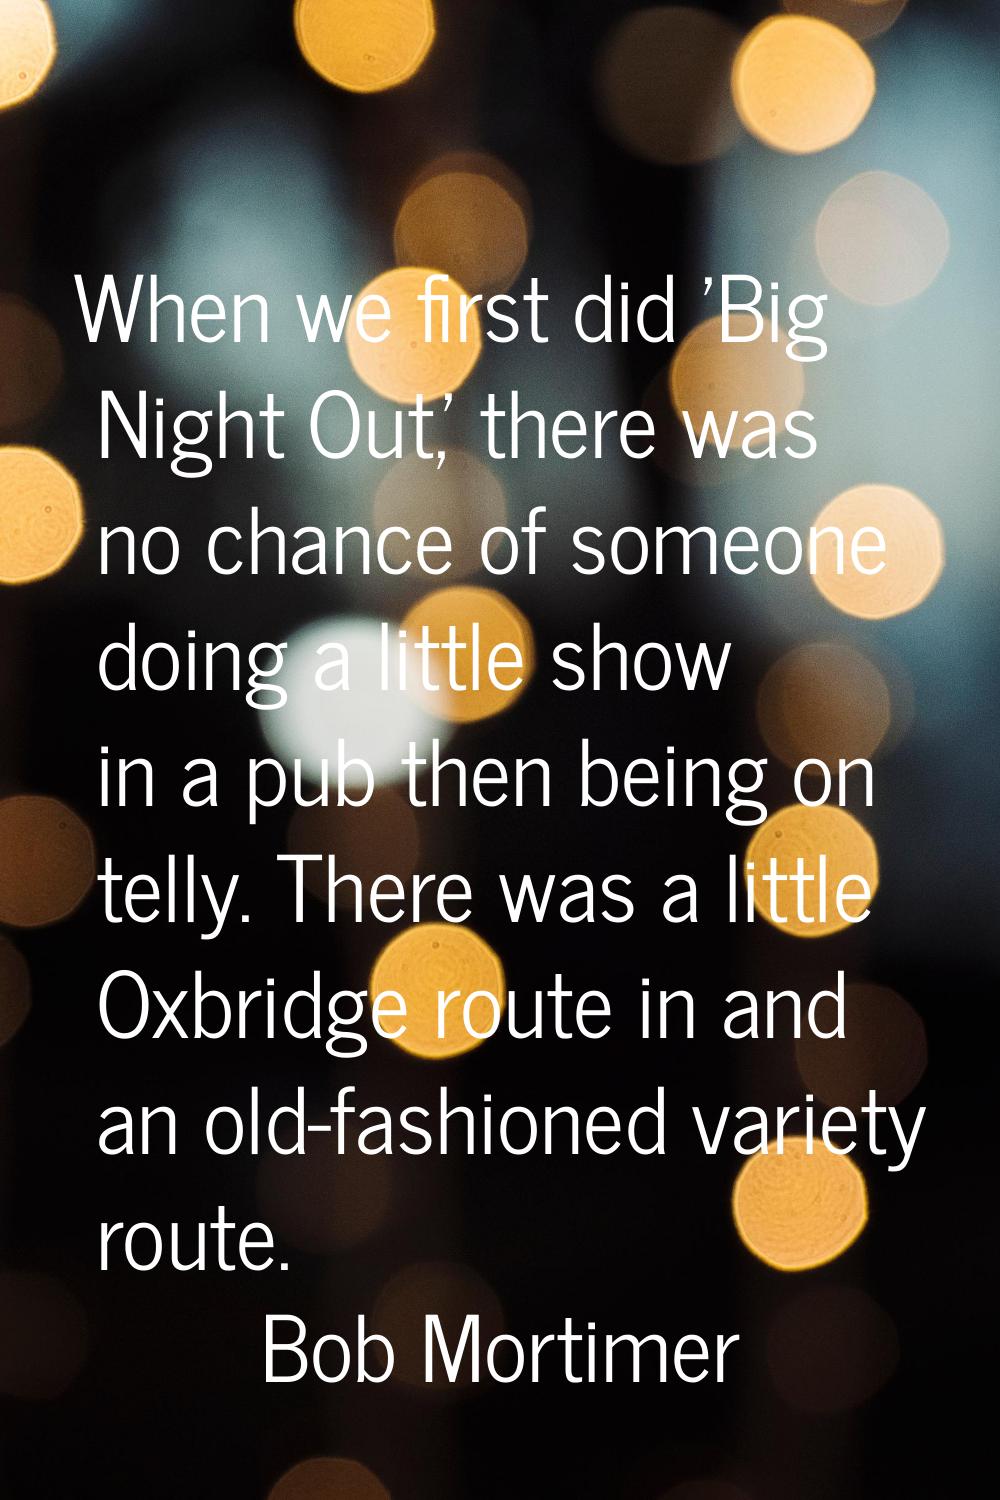 When we first did 'Big Night Out,' there was no chance of someone doing a little show in a pub then